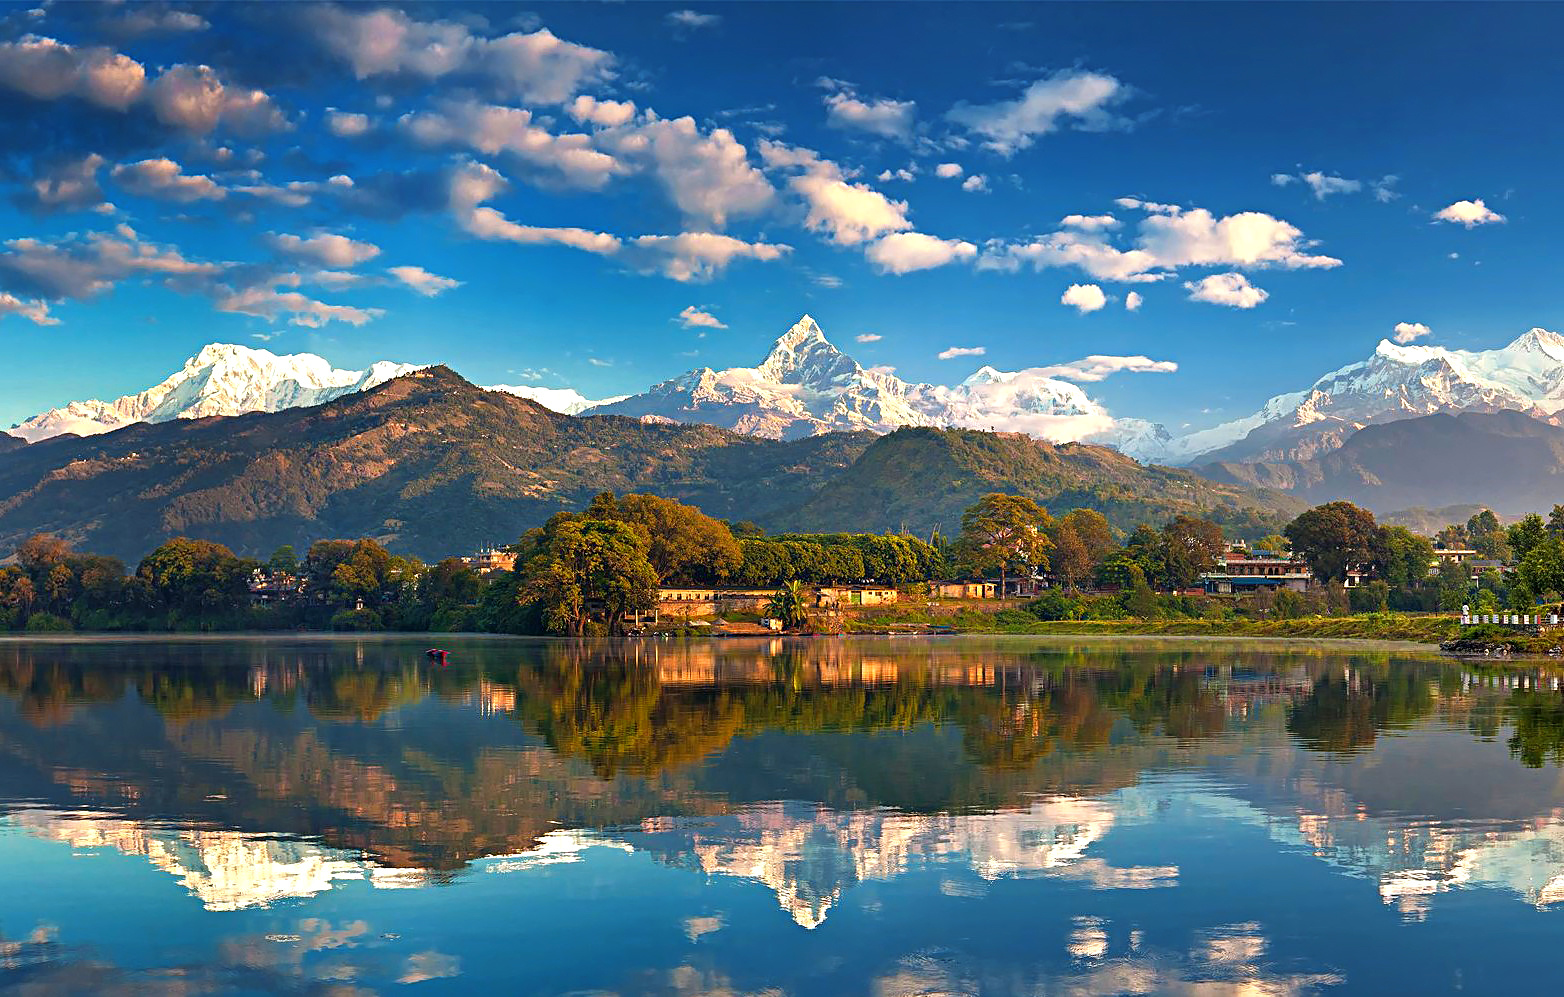 Trek to Lumre, Drive to Pokhara 2-3hrs trek and 2 hours drive.